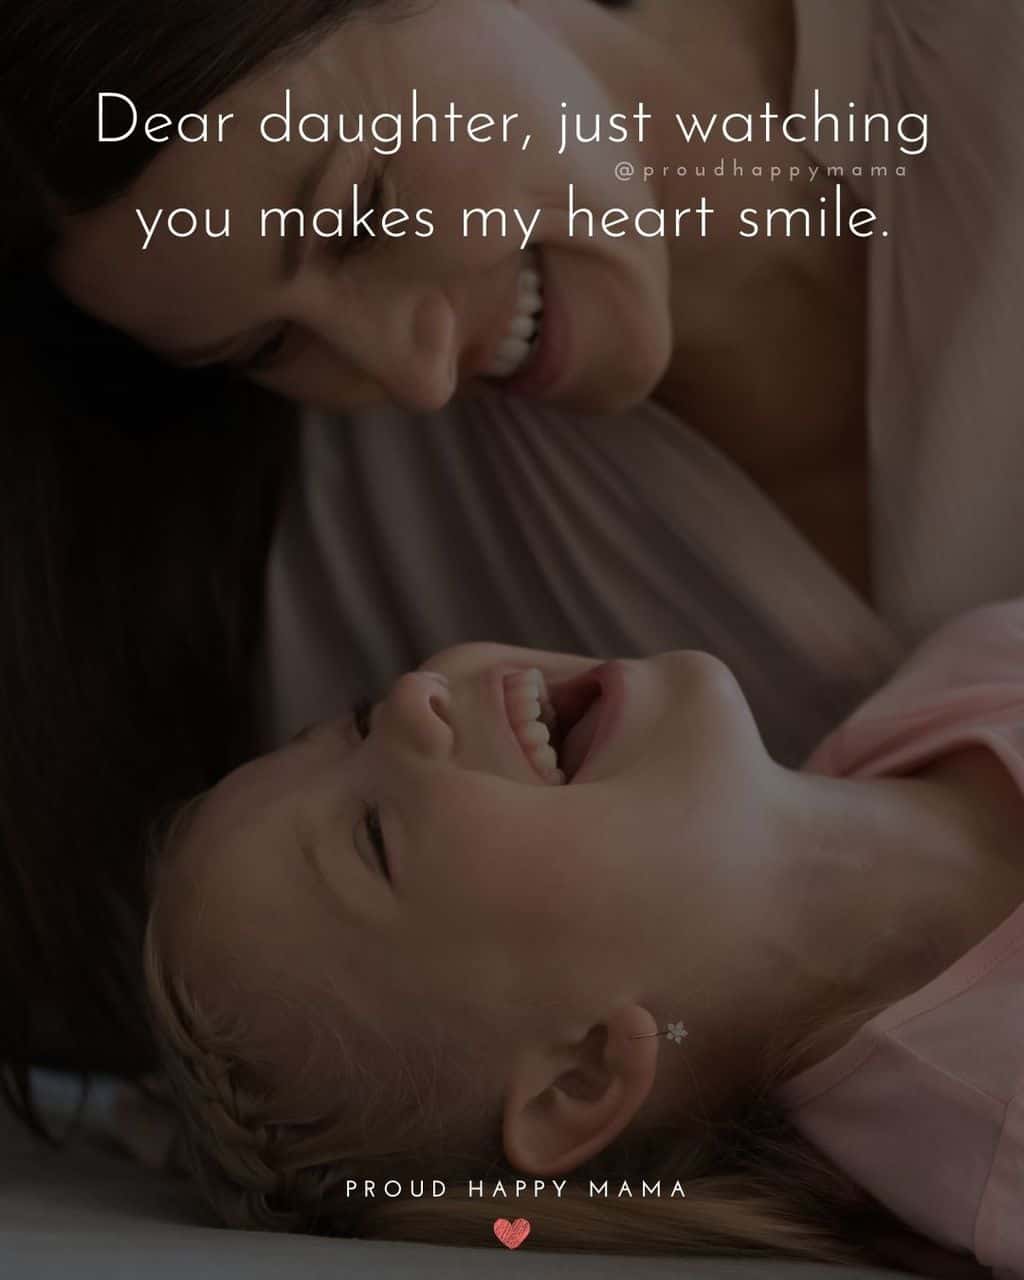 dear my daughter quotes - ‘Dear daughter, just watching you makes my heart smile.’